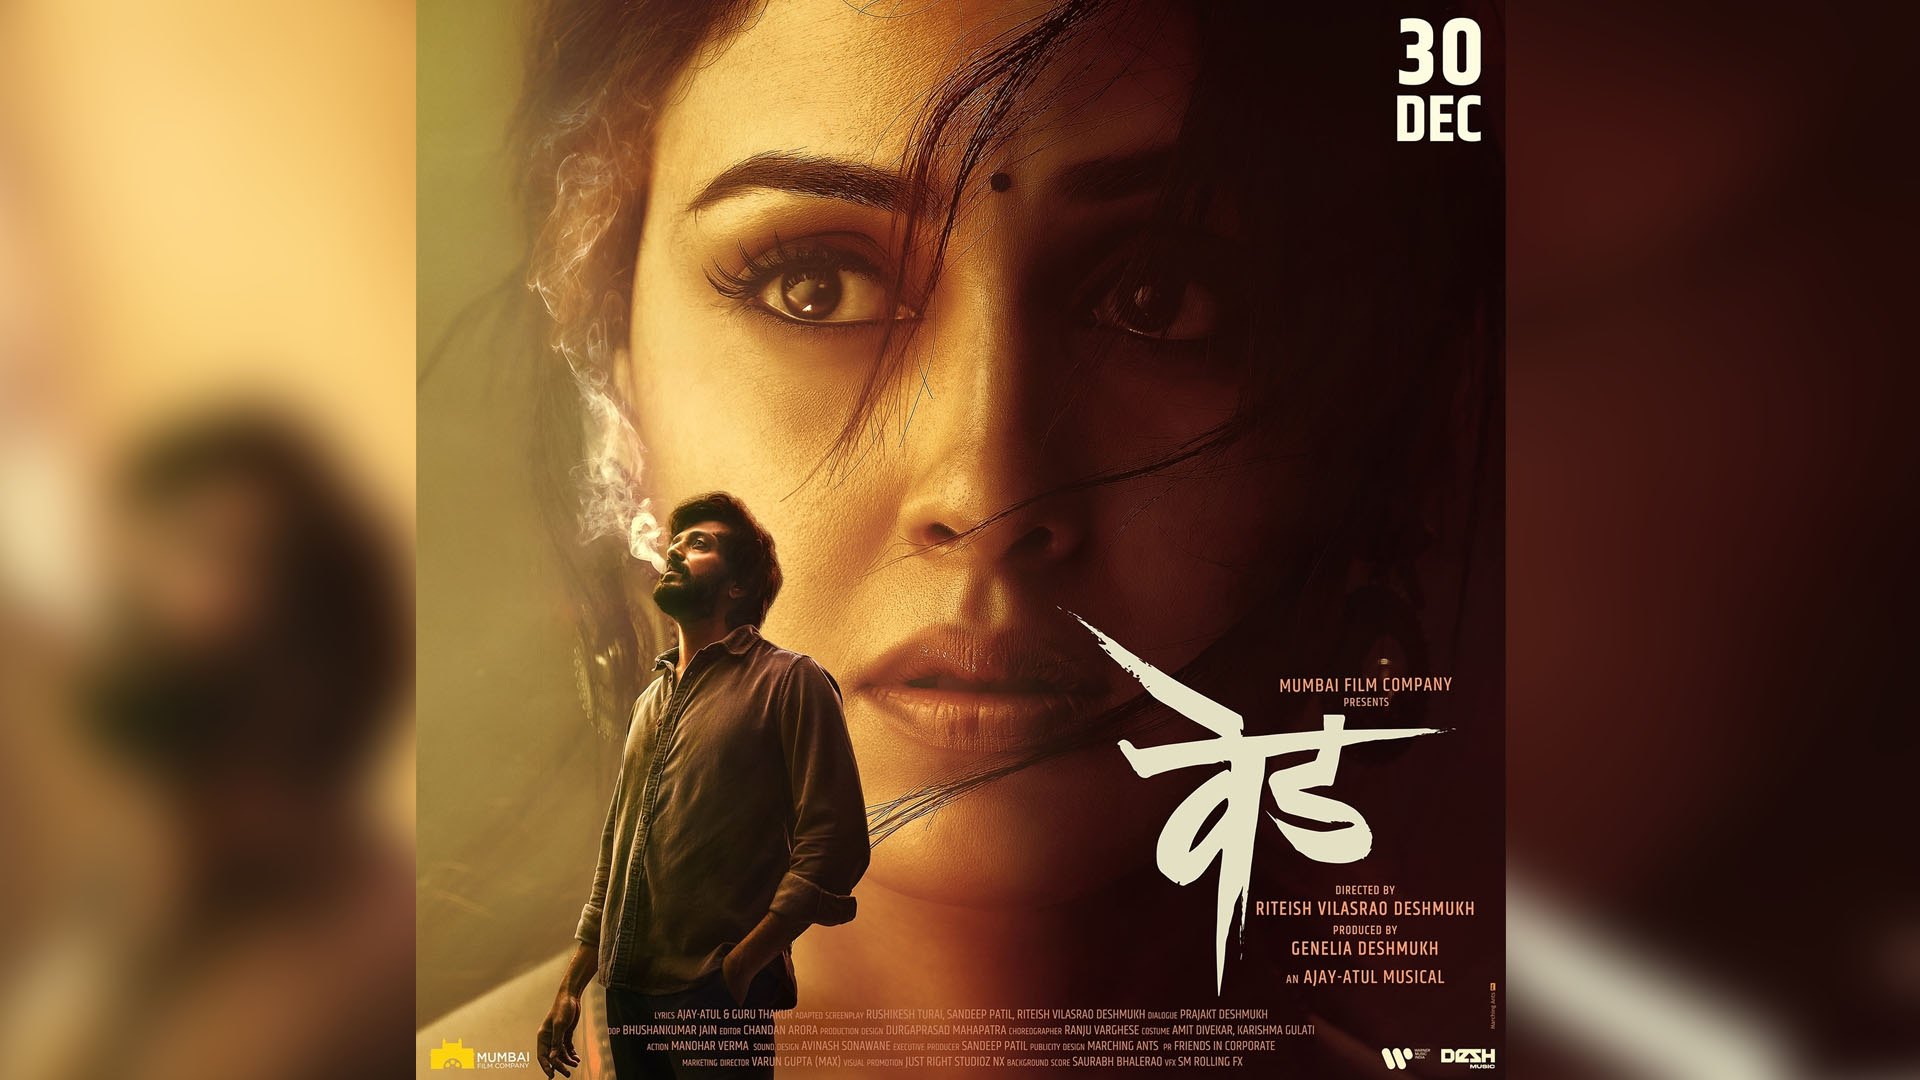 *Get Ready for the Return ,Genelia Deshmukh Mesmerizes her fans with the outstanding performance in her forthcoming Marathi film Ved. *